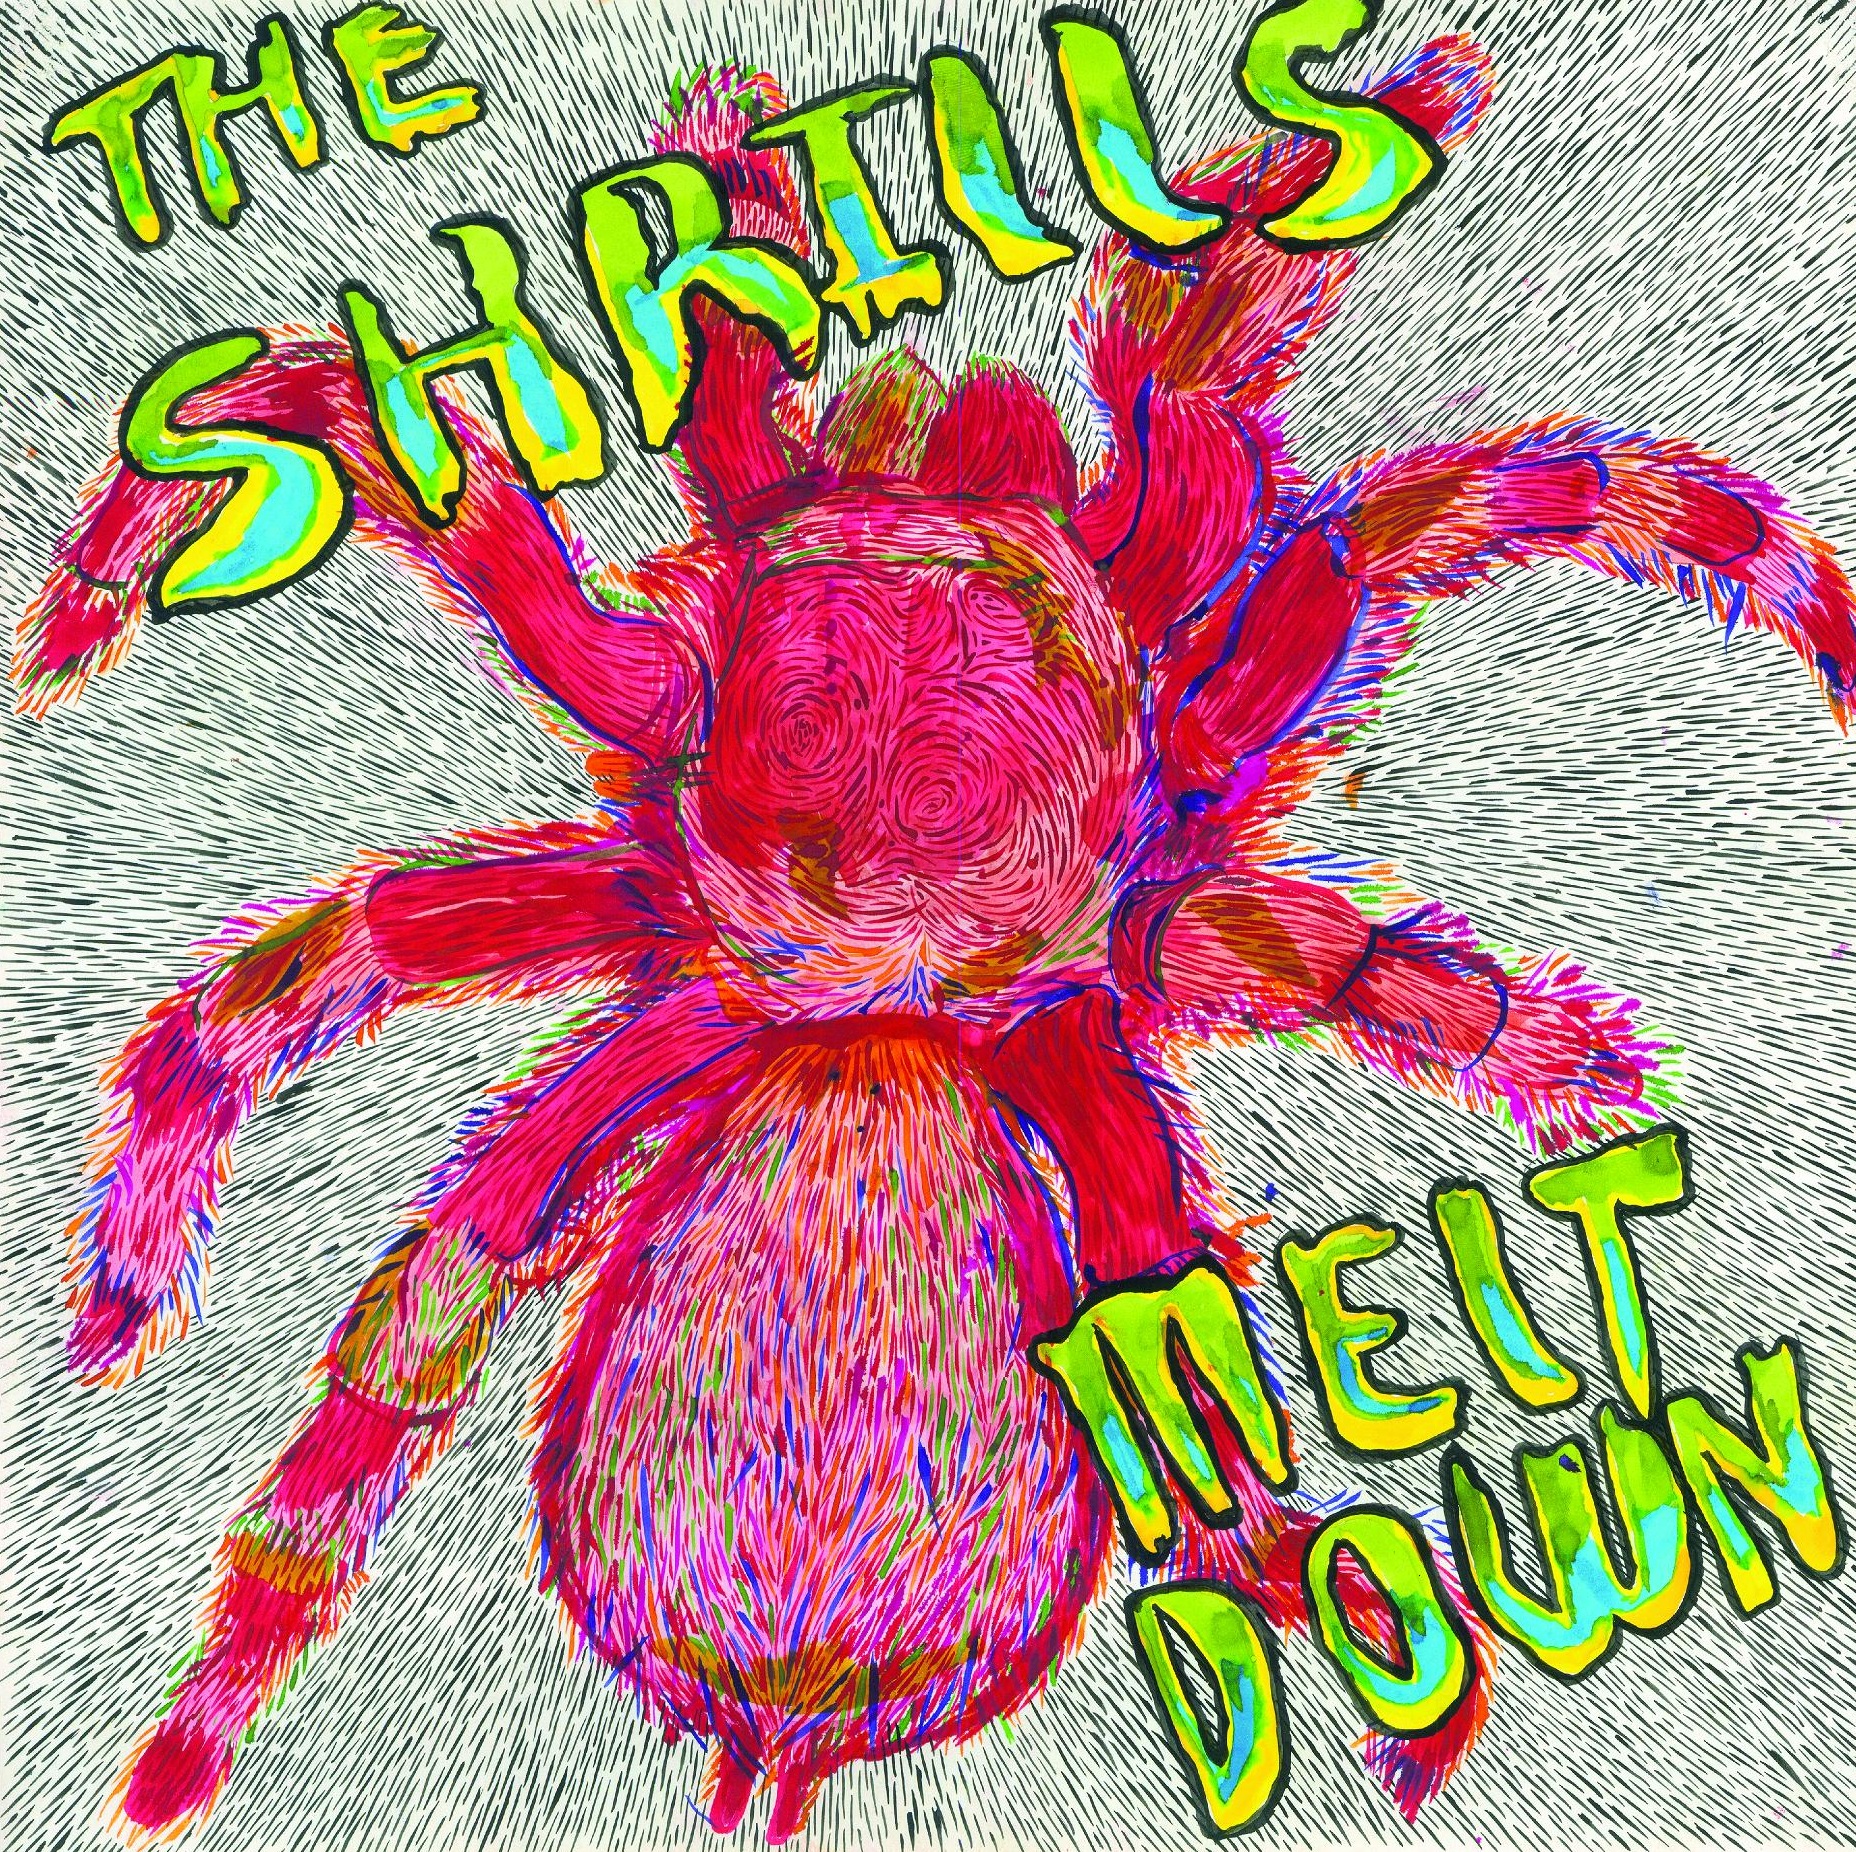 The Shrills- Meltdown LP   ~   ULTRA RARE TEST PRESSING LIMITED TO 4 COPIES